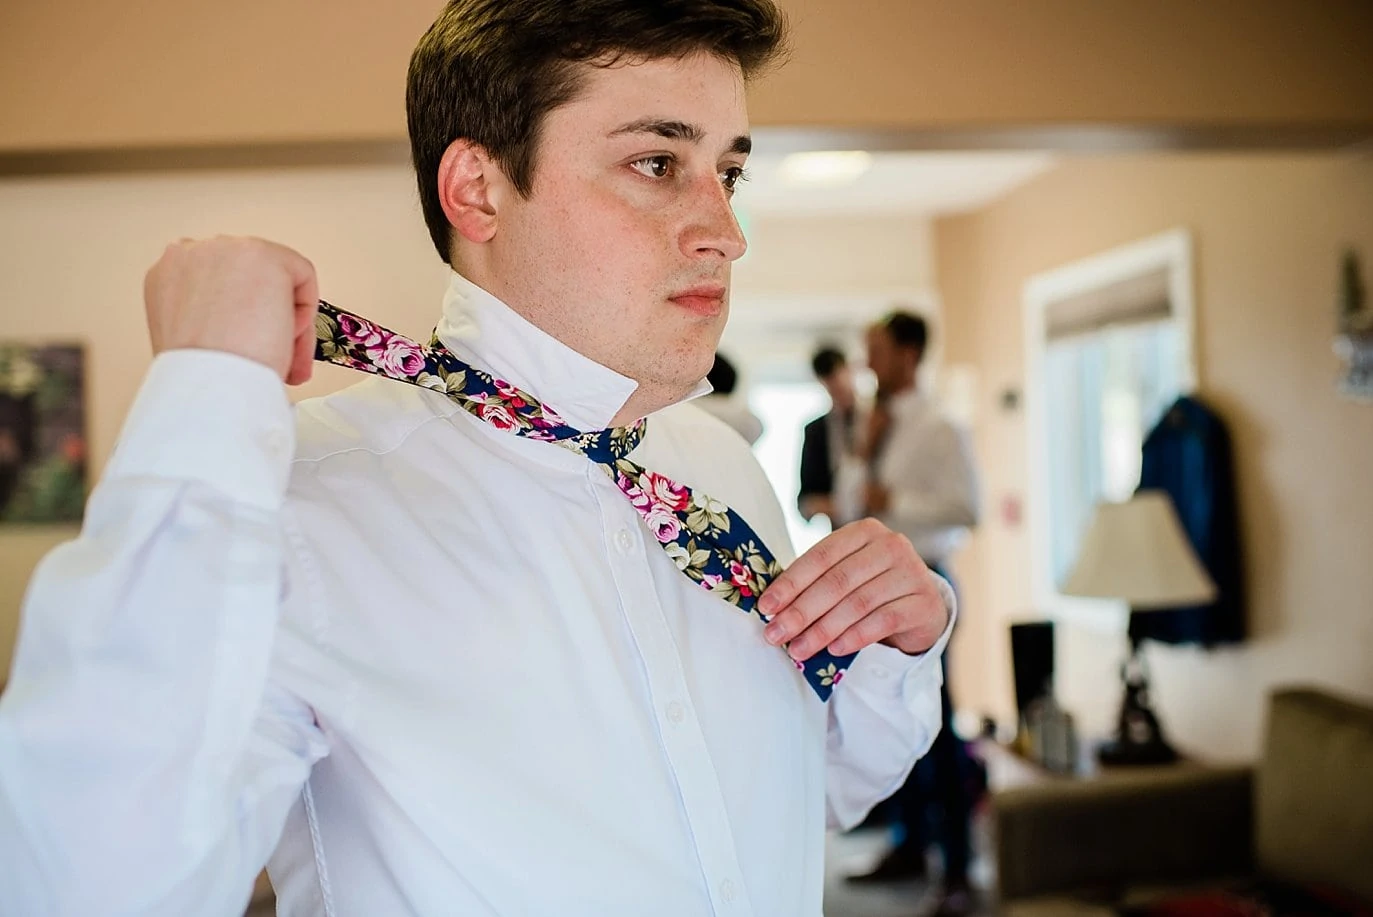 Groom tying floral bow tie on wedding day photo